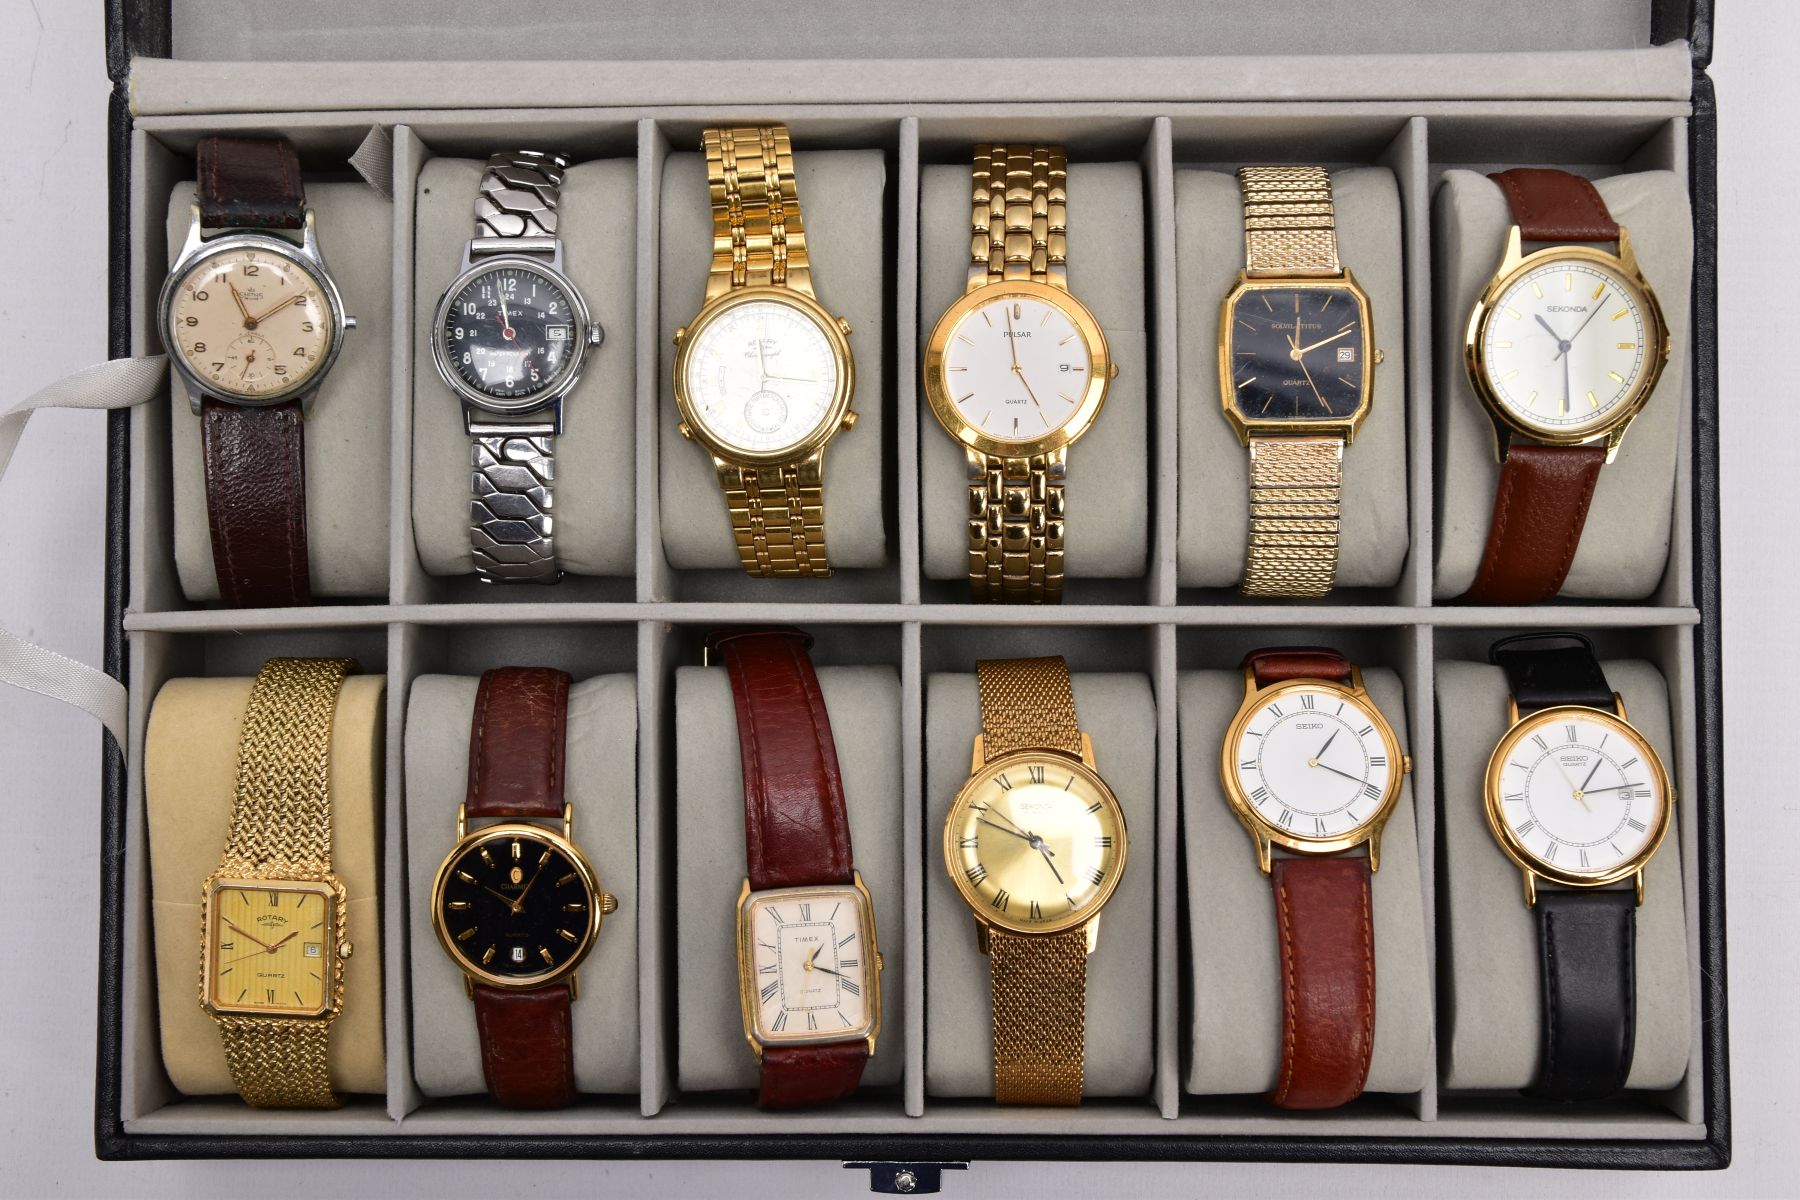 A WATCH DISPLAY CASE OF GENTS WRISTWATCHES, a black and glass panelled watch display case, with